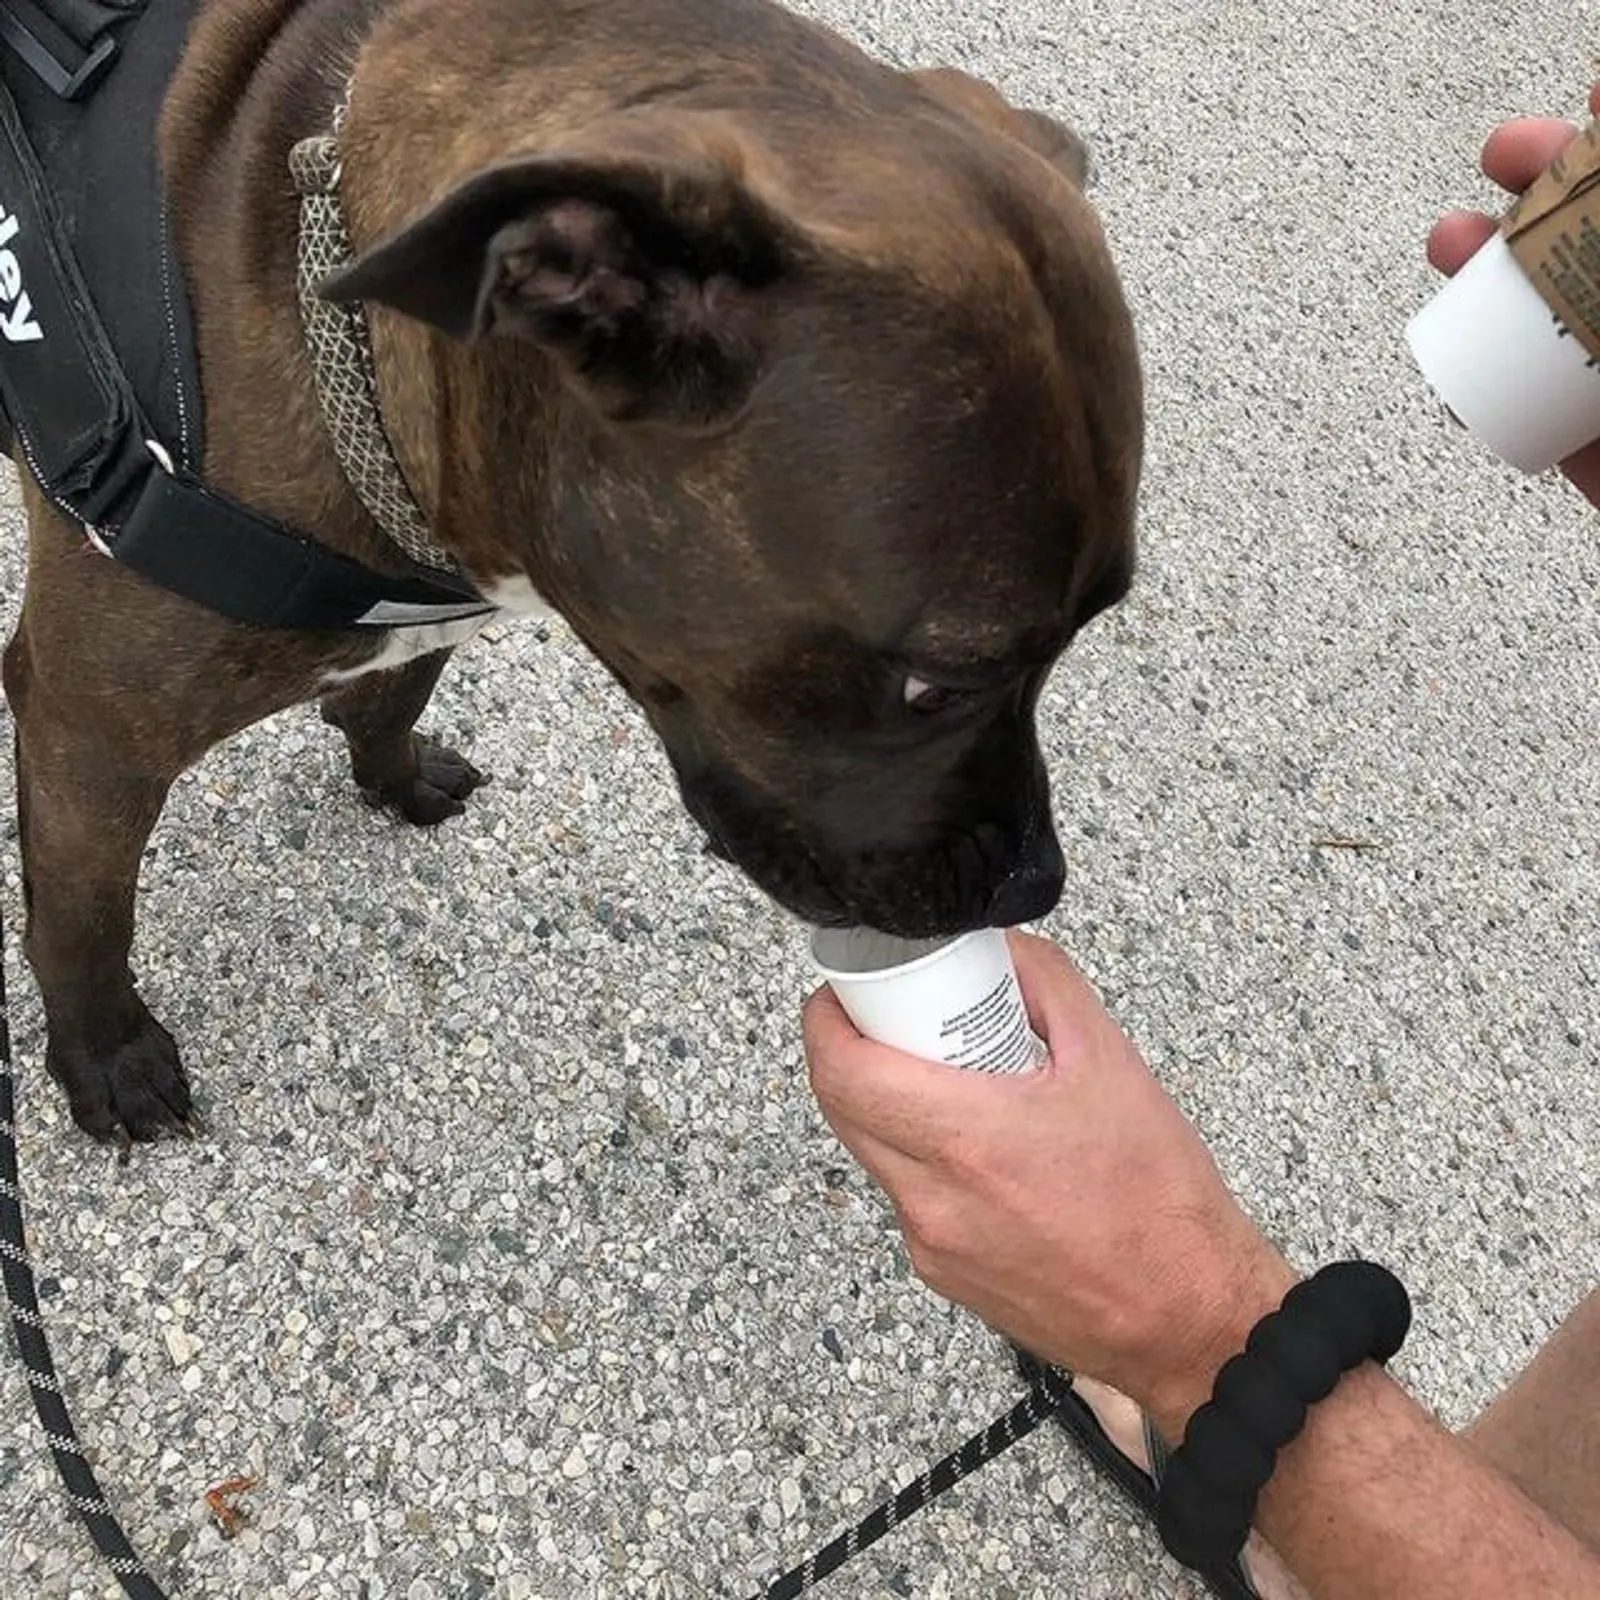 cane corso american bulldog eating from a cup from his owner's hand